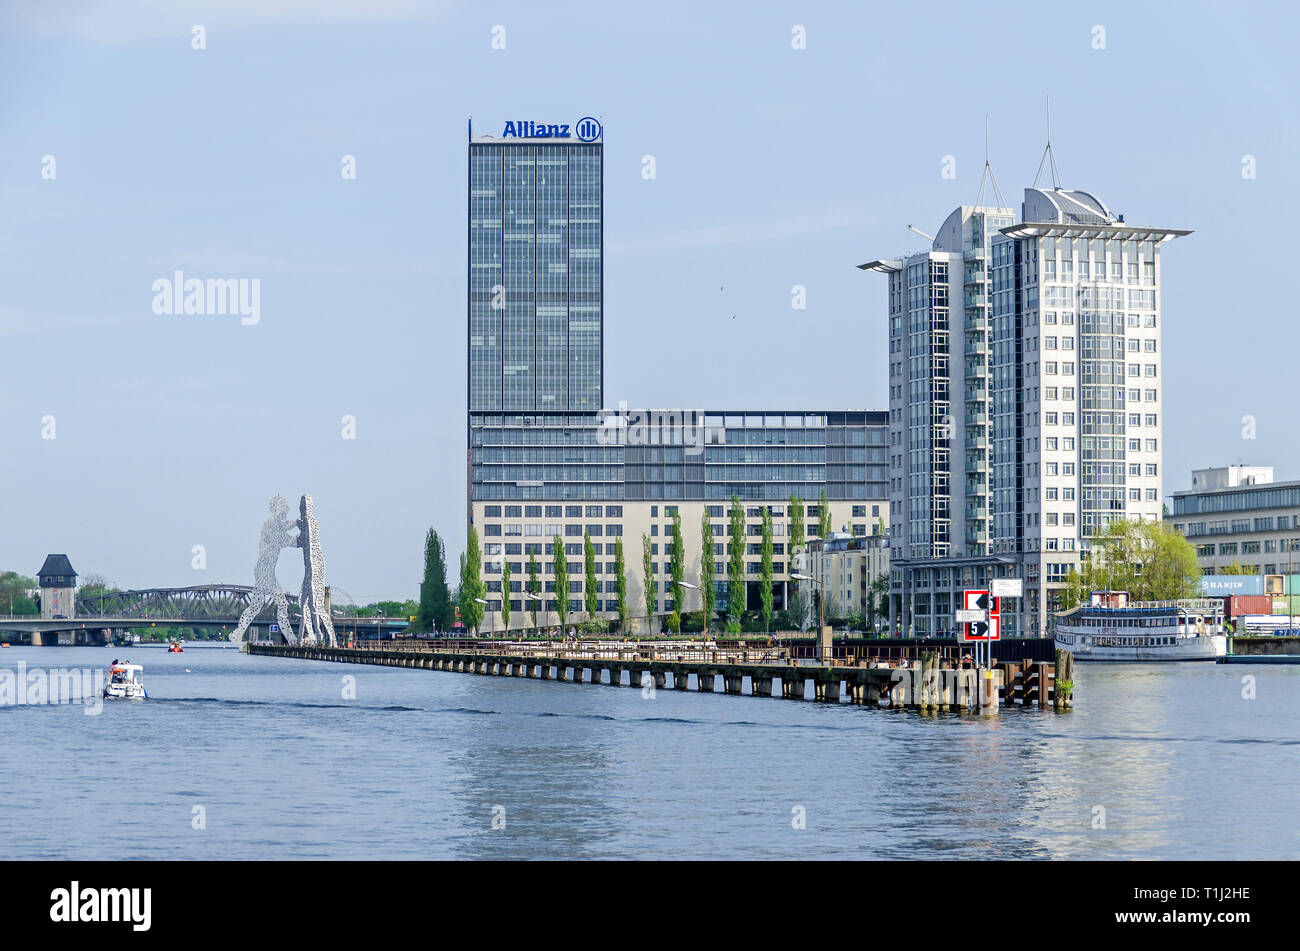 Berlin, Germany - April 22, 2018: River Spree with the high-Rise at the Elsenbruecke bridge, the building of the Allianz company, and Molecular Men Stock Photo